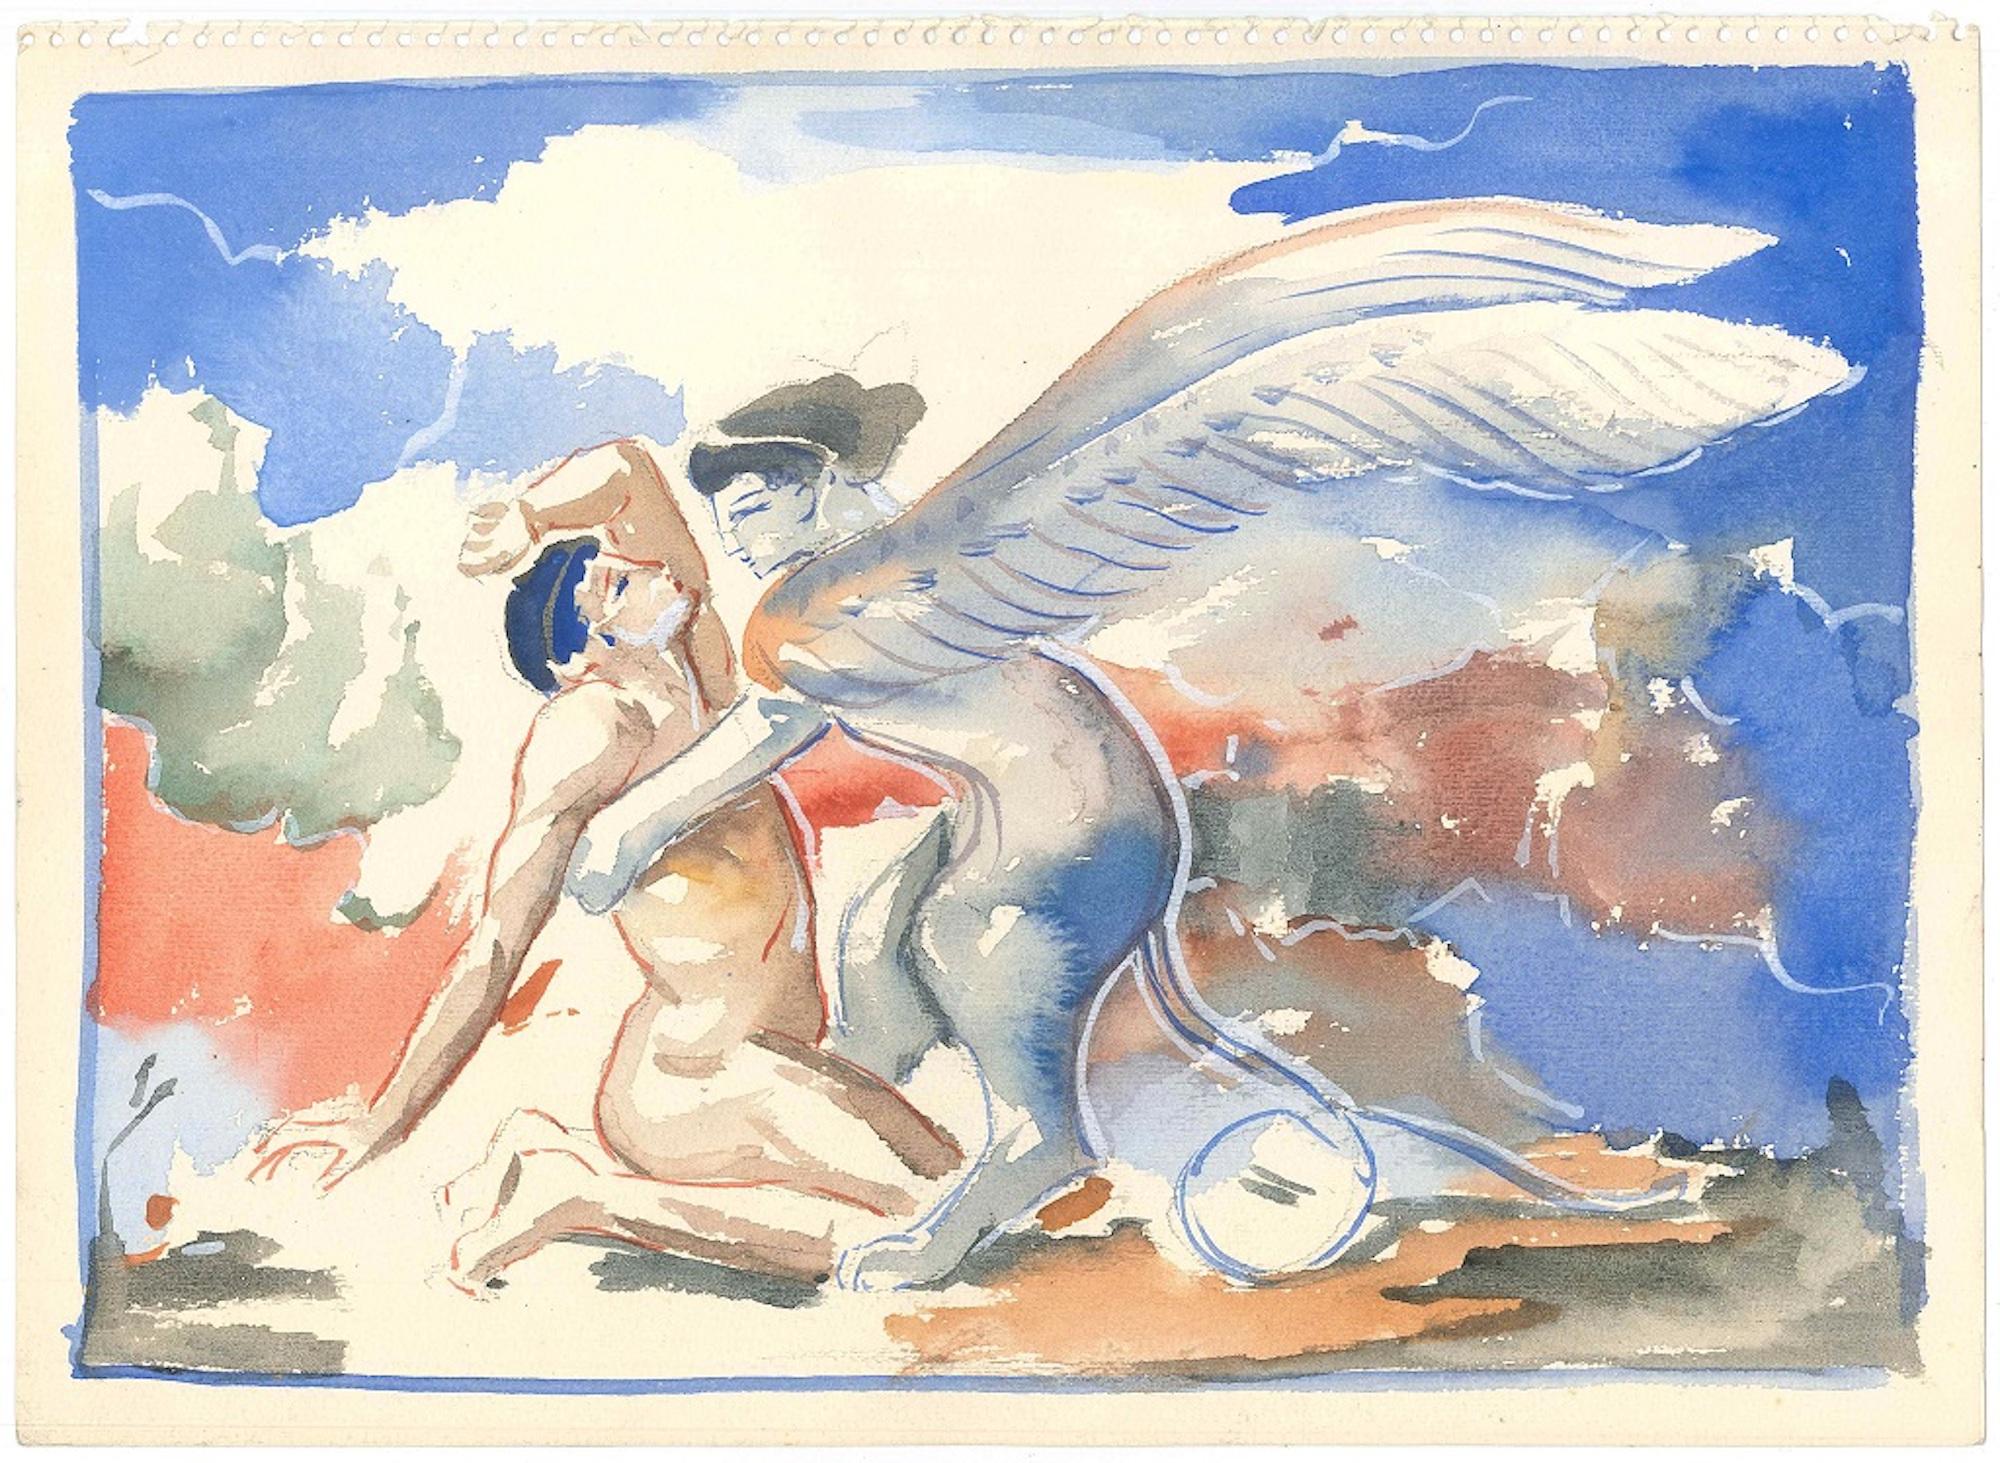 Alkis Matheos Figurative Art - The Sphinx - Original Pencil, Pen and Watercolor on Paper by A. Matheos 